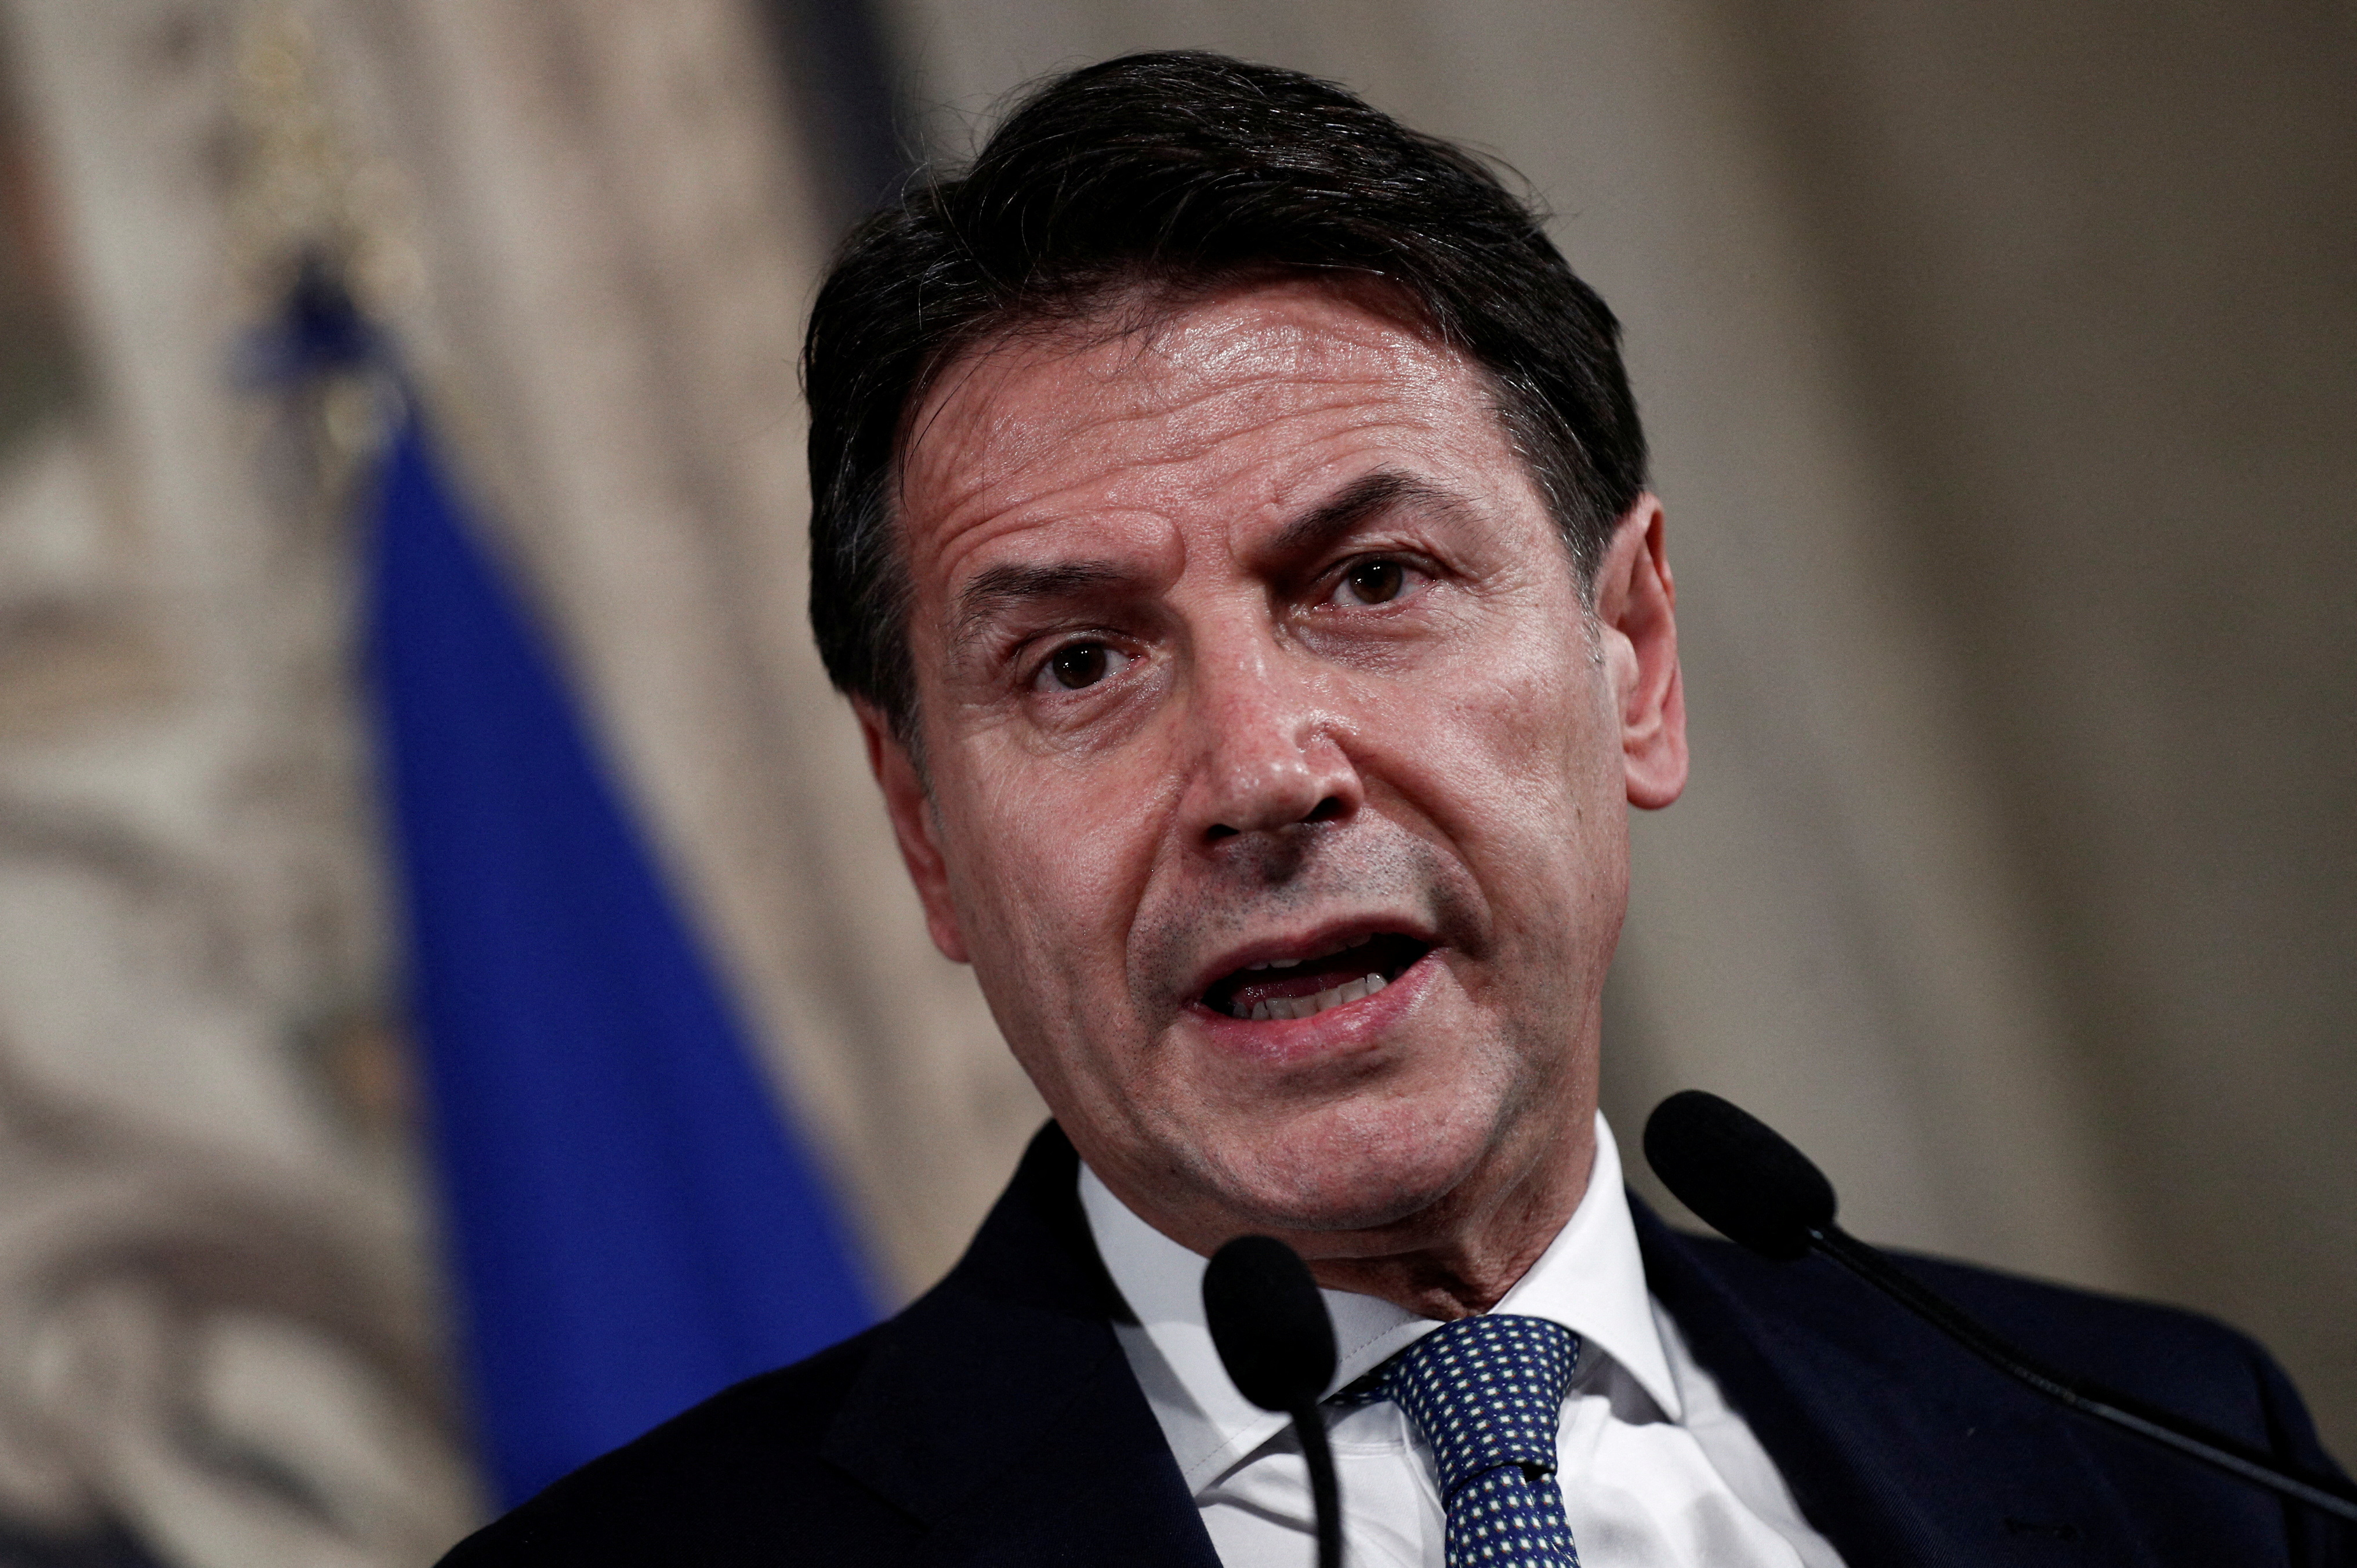 Former Italy PM Conte investigated over response to COVID pandemic